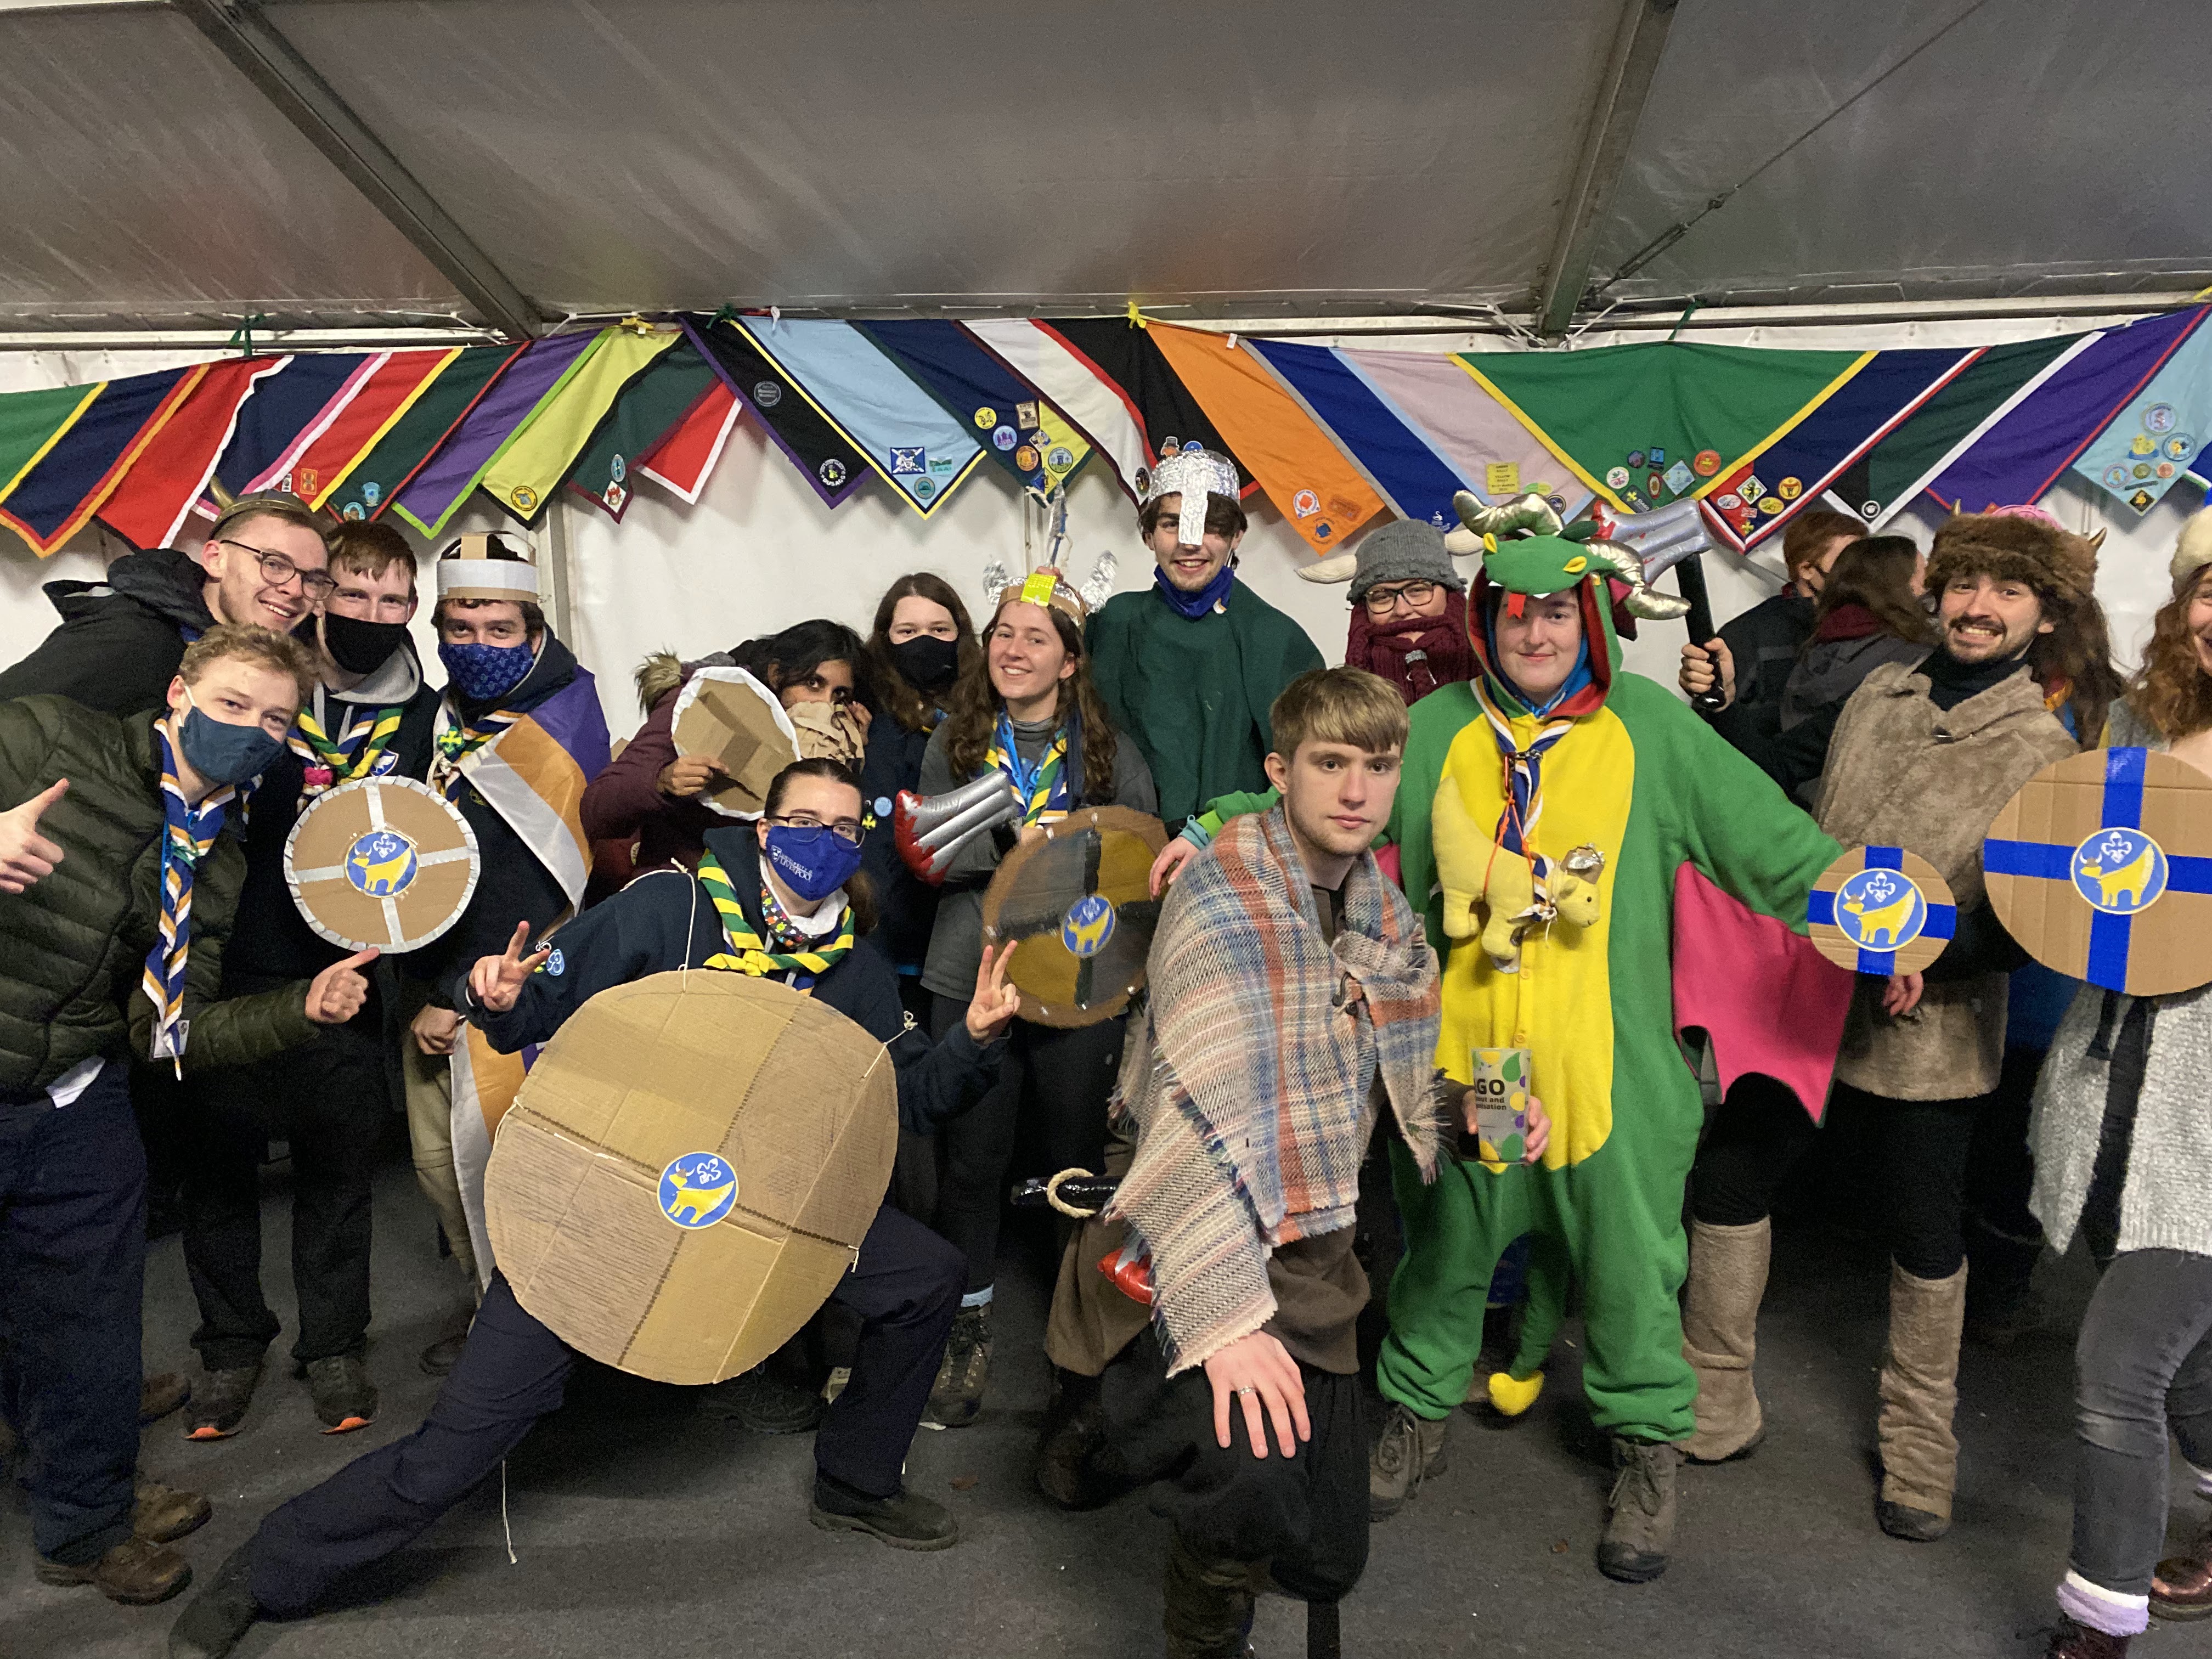 Medium sized group photo of those wearing Viking themed fancy dress before the ceilidh